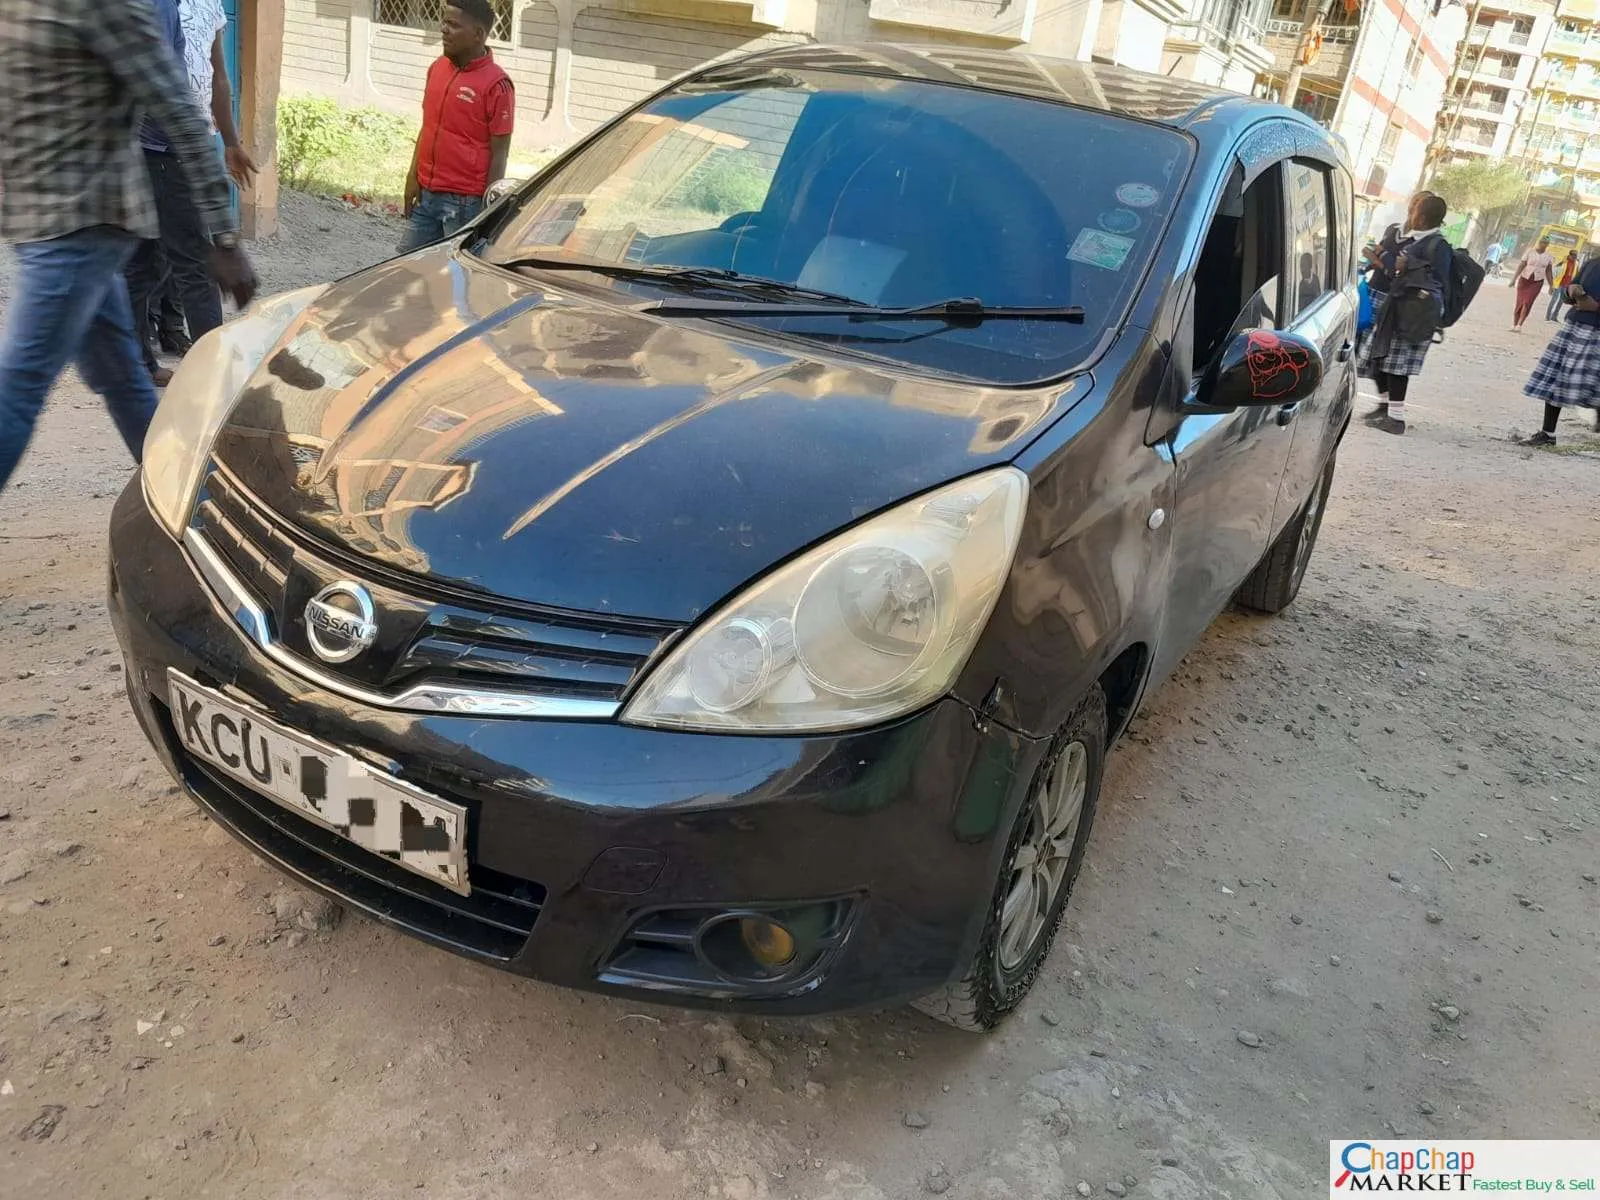 Nissan Note Kenya 🔥 QUICK SALE You Pay 20% Deposit Trade in Ok Nissan Note for sale in kenya hire purchase installments EXCLUSIVE 🔥